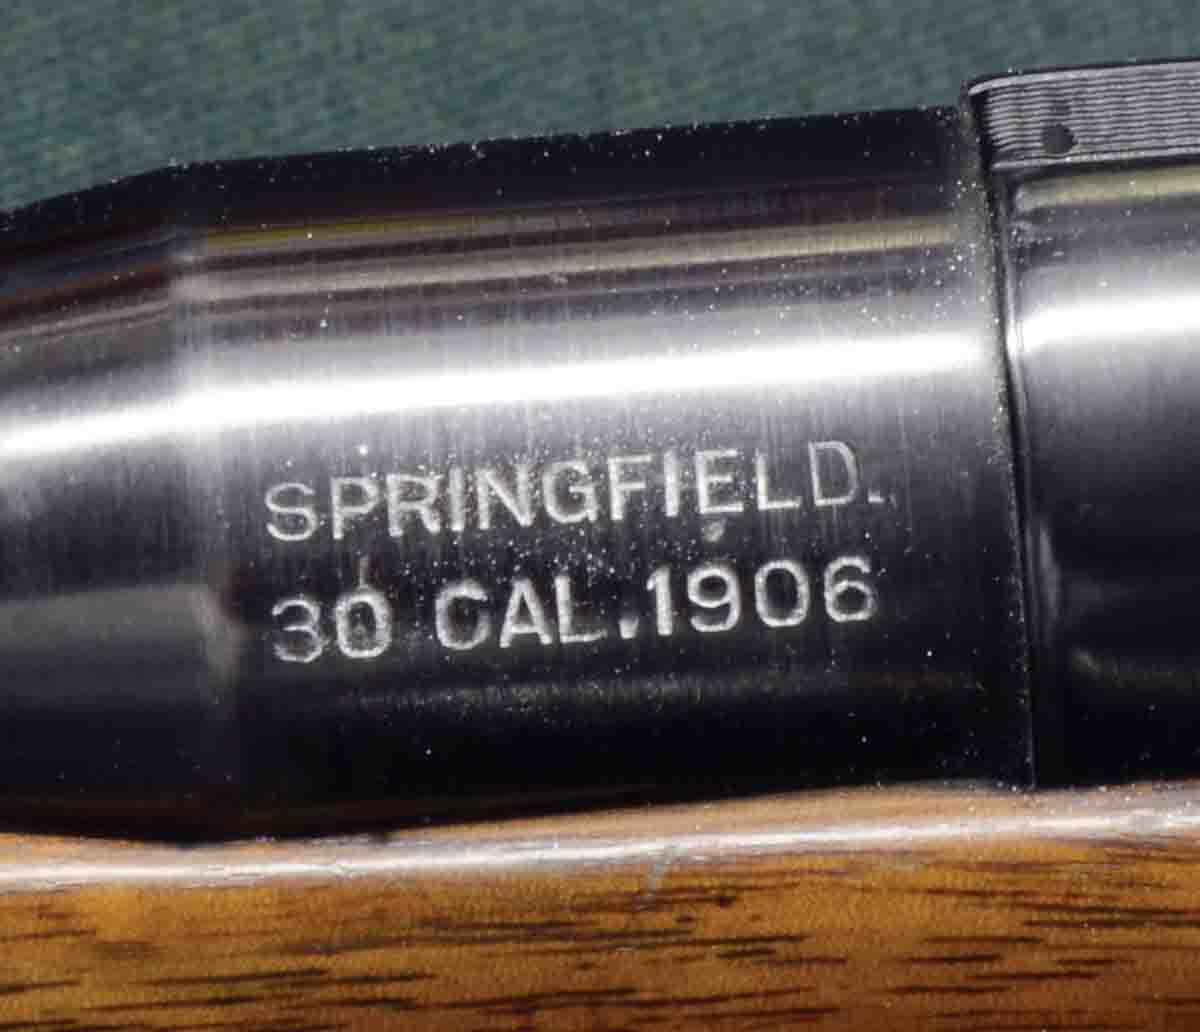 The roll-marking on the left side of the barrel just forward of the receiver indicates the cartridge we know today as the .30-06 was not called that in the early days.